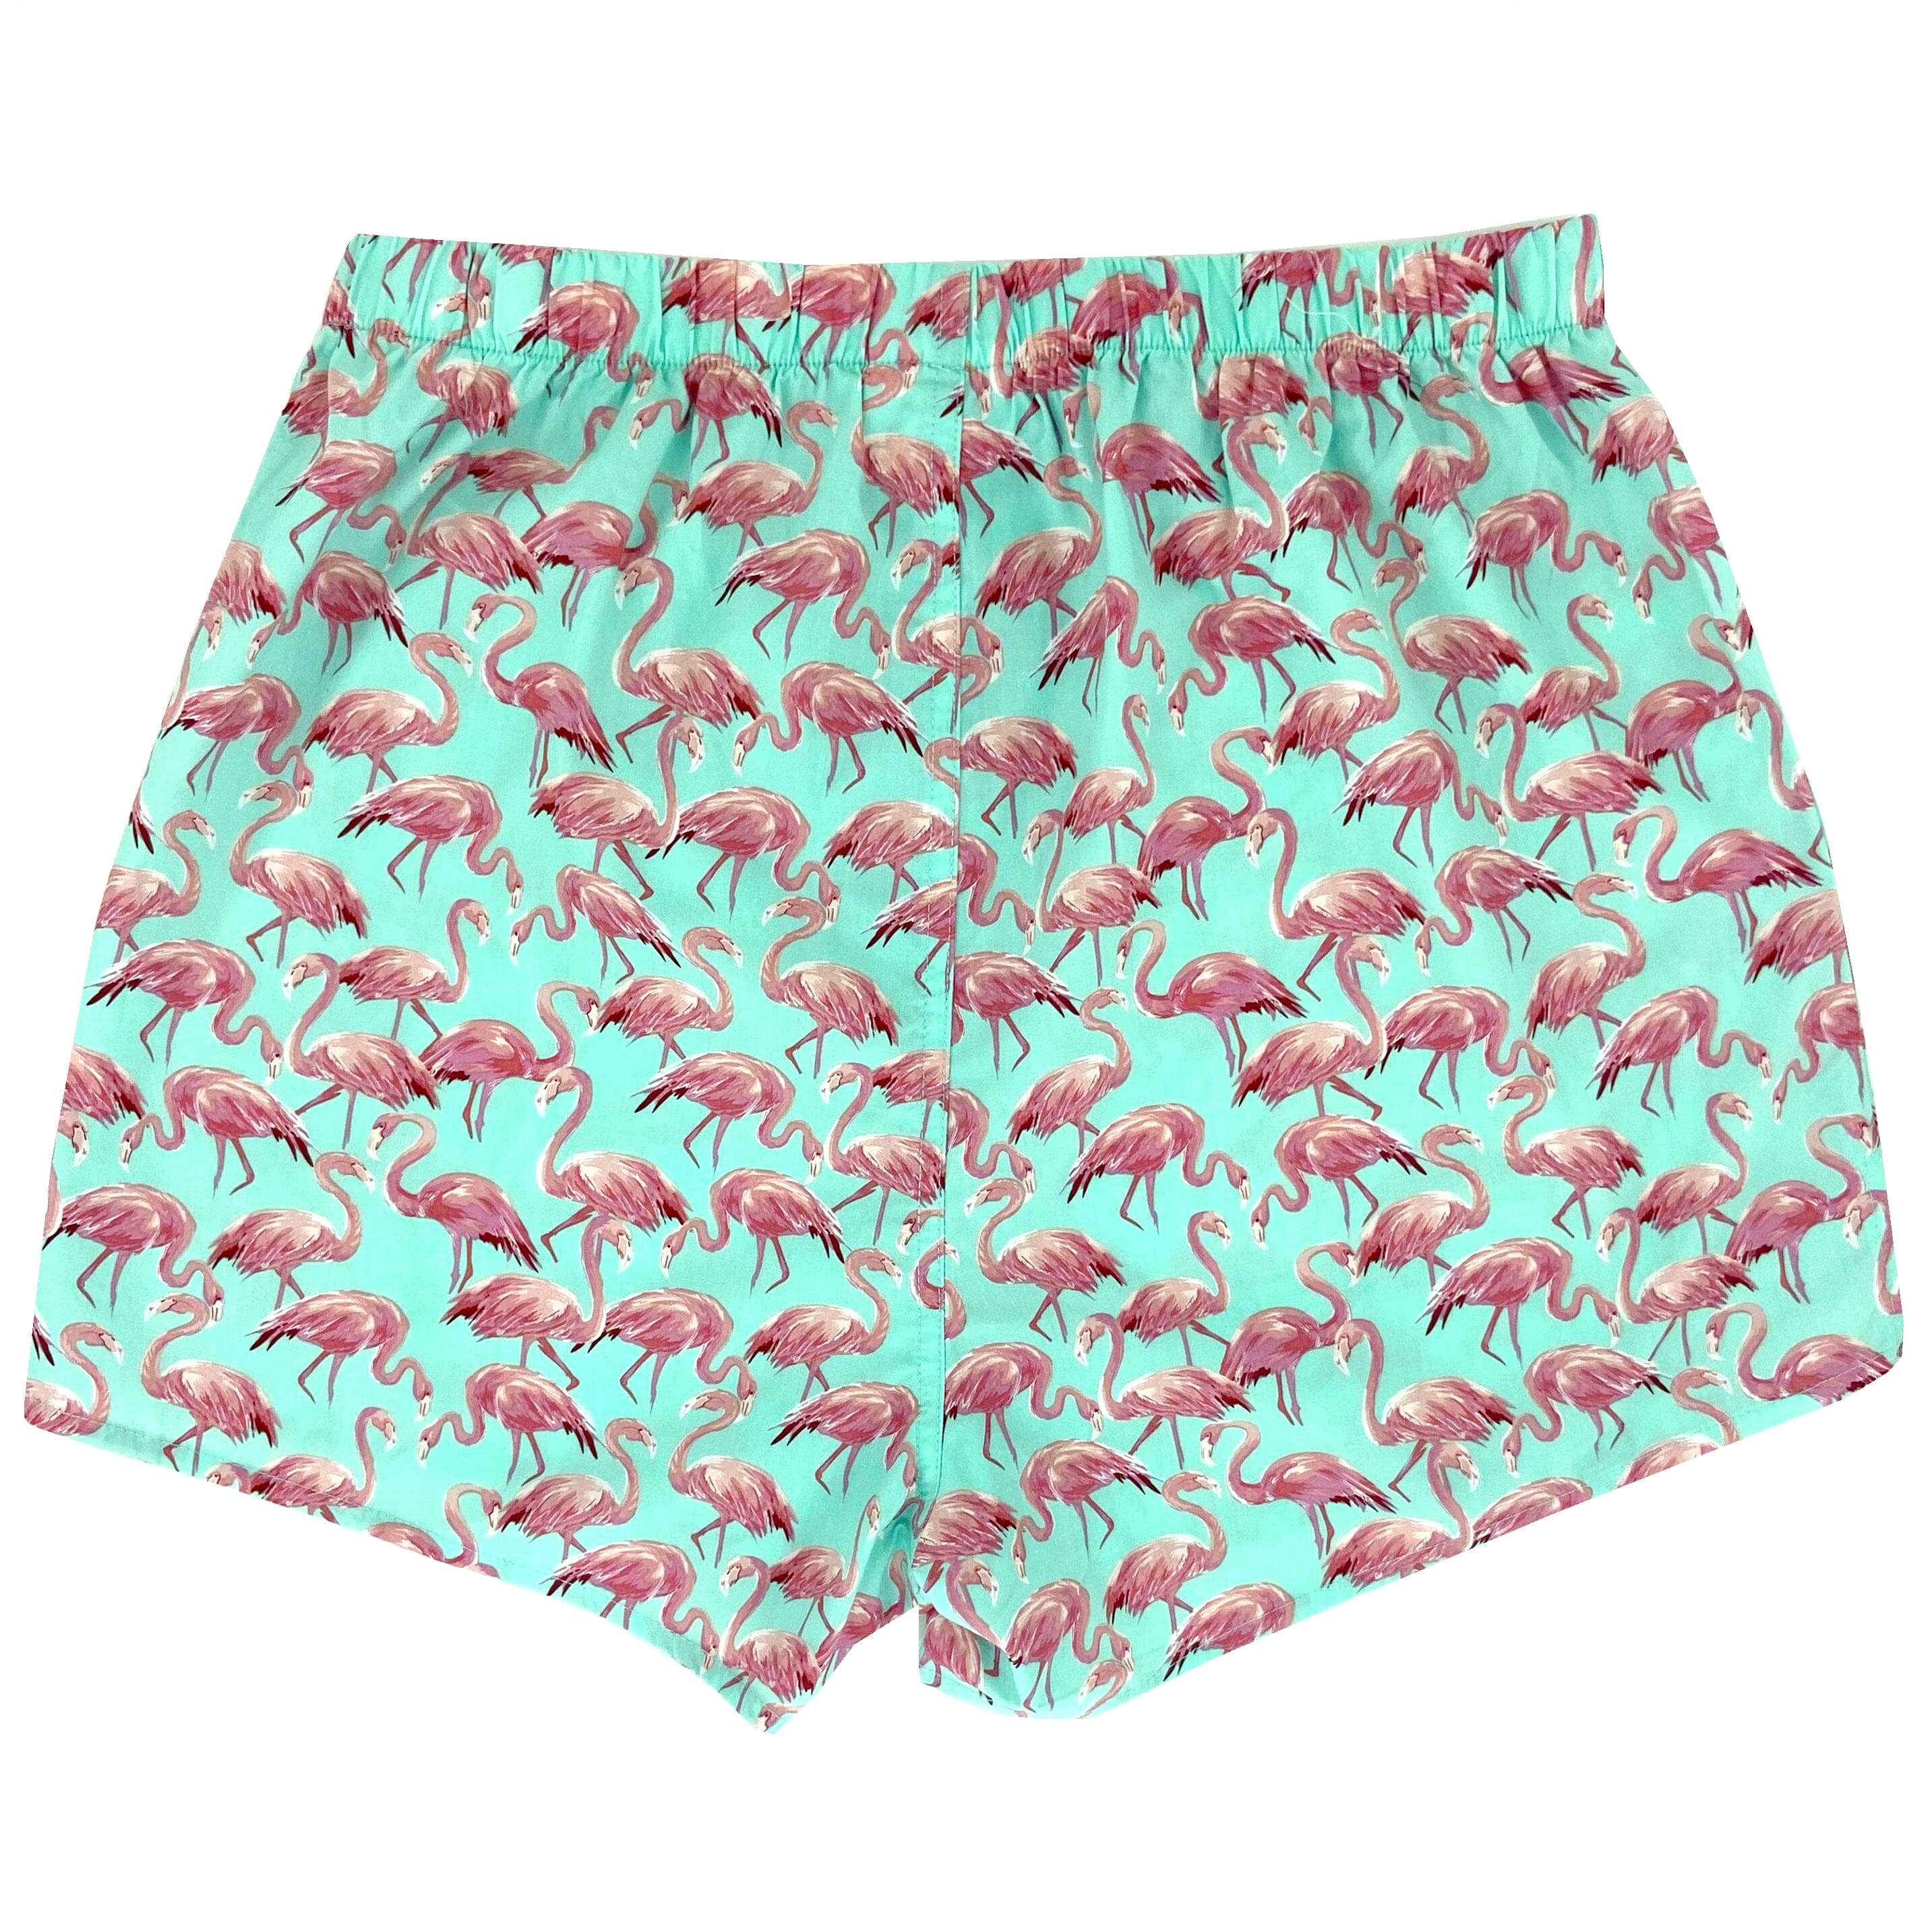 Men's Cotton Boxer Shorts with Limited Edition Flamingo All Over Print